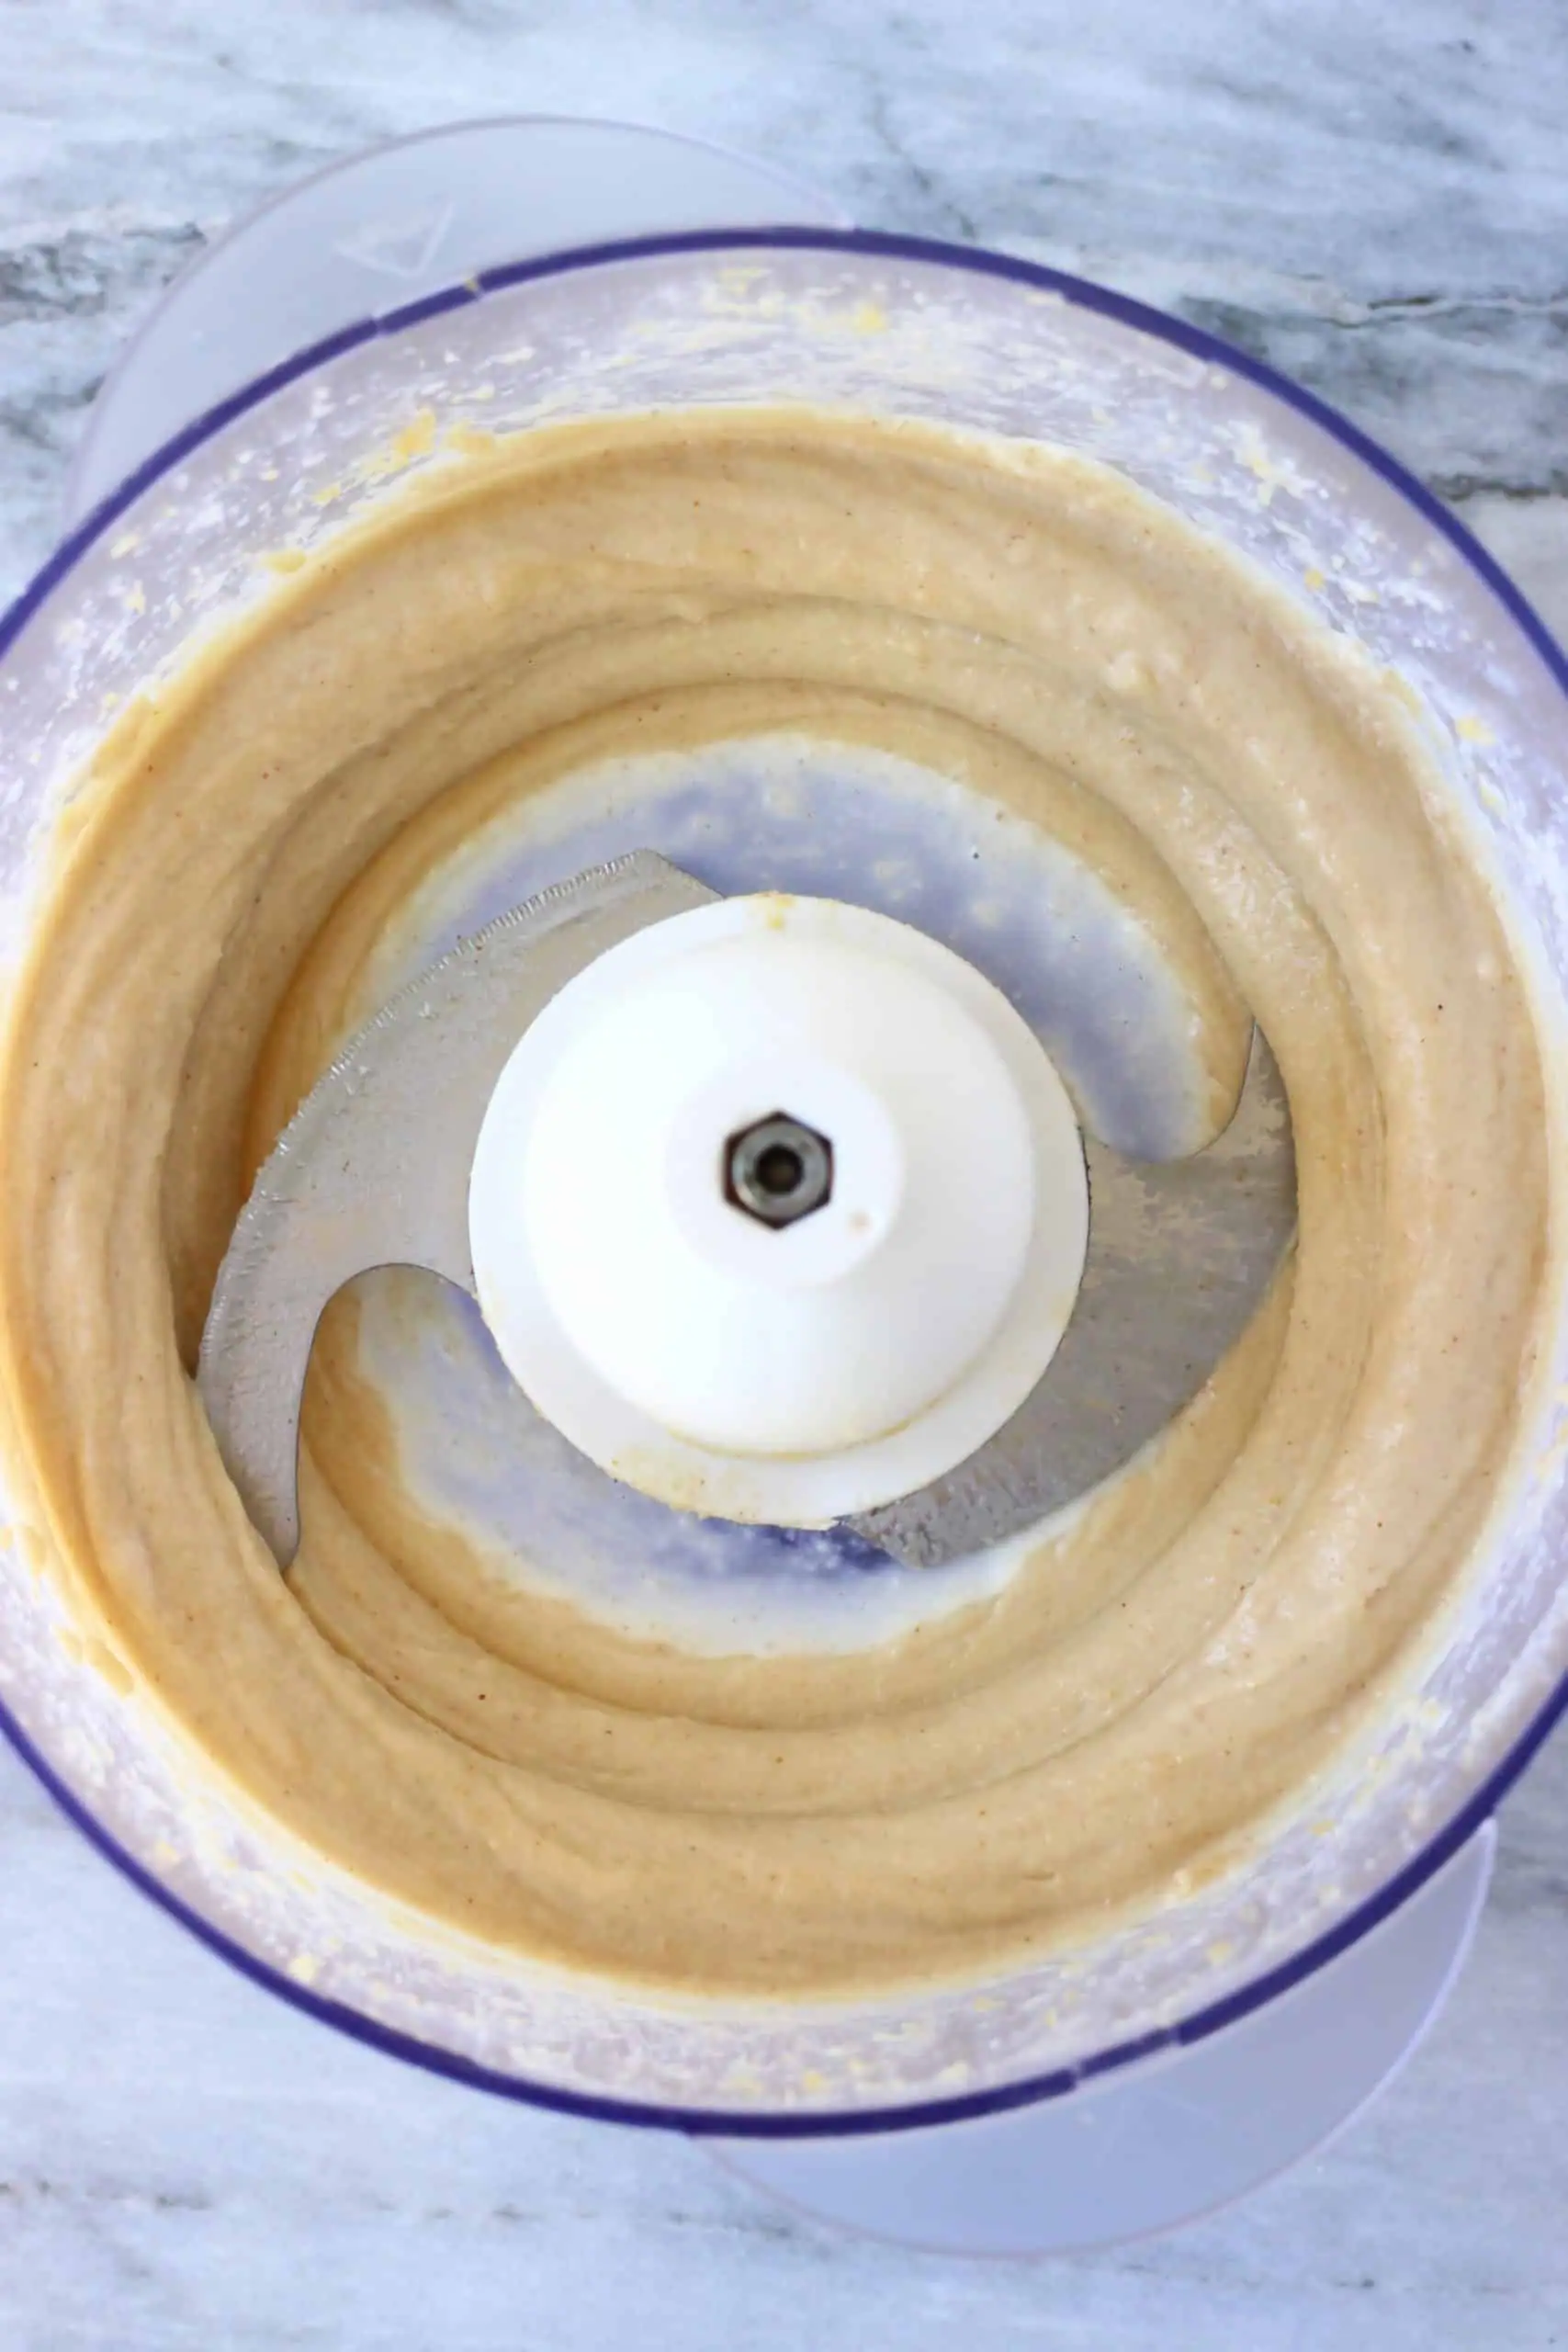 Peanut butter frosting in a food processor